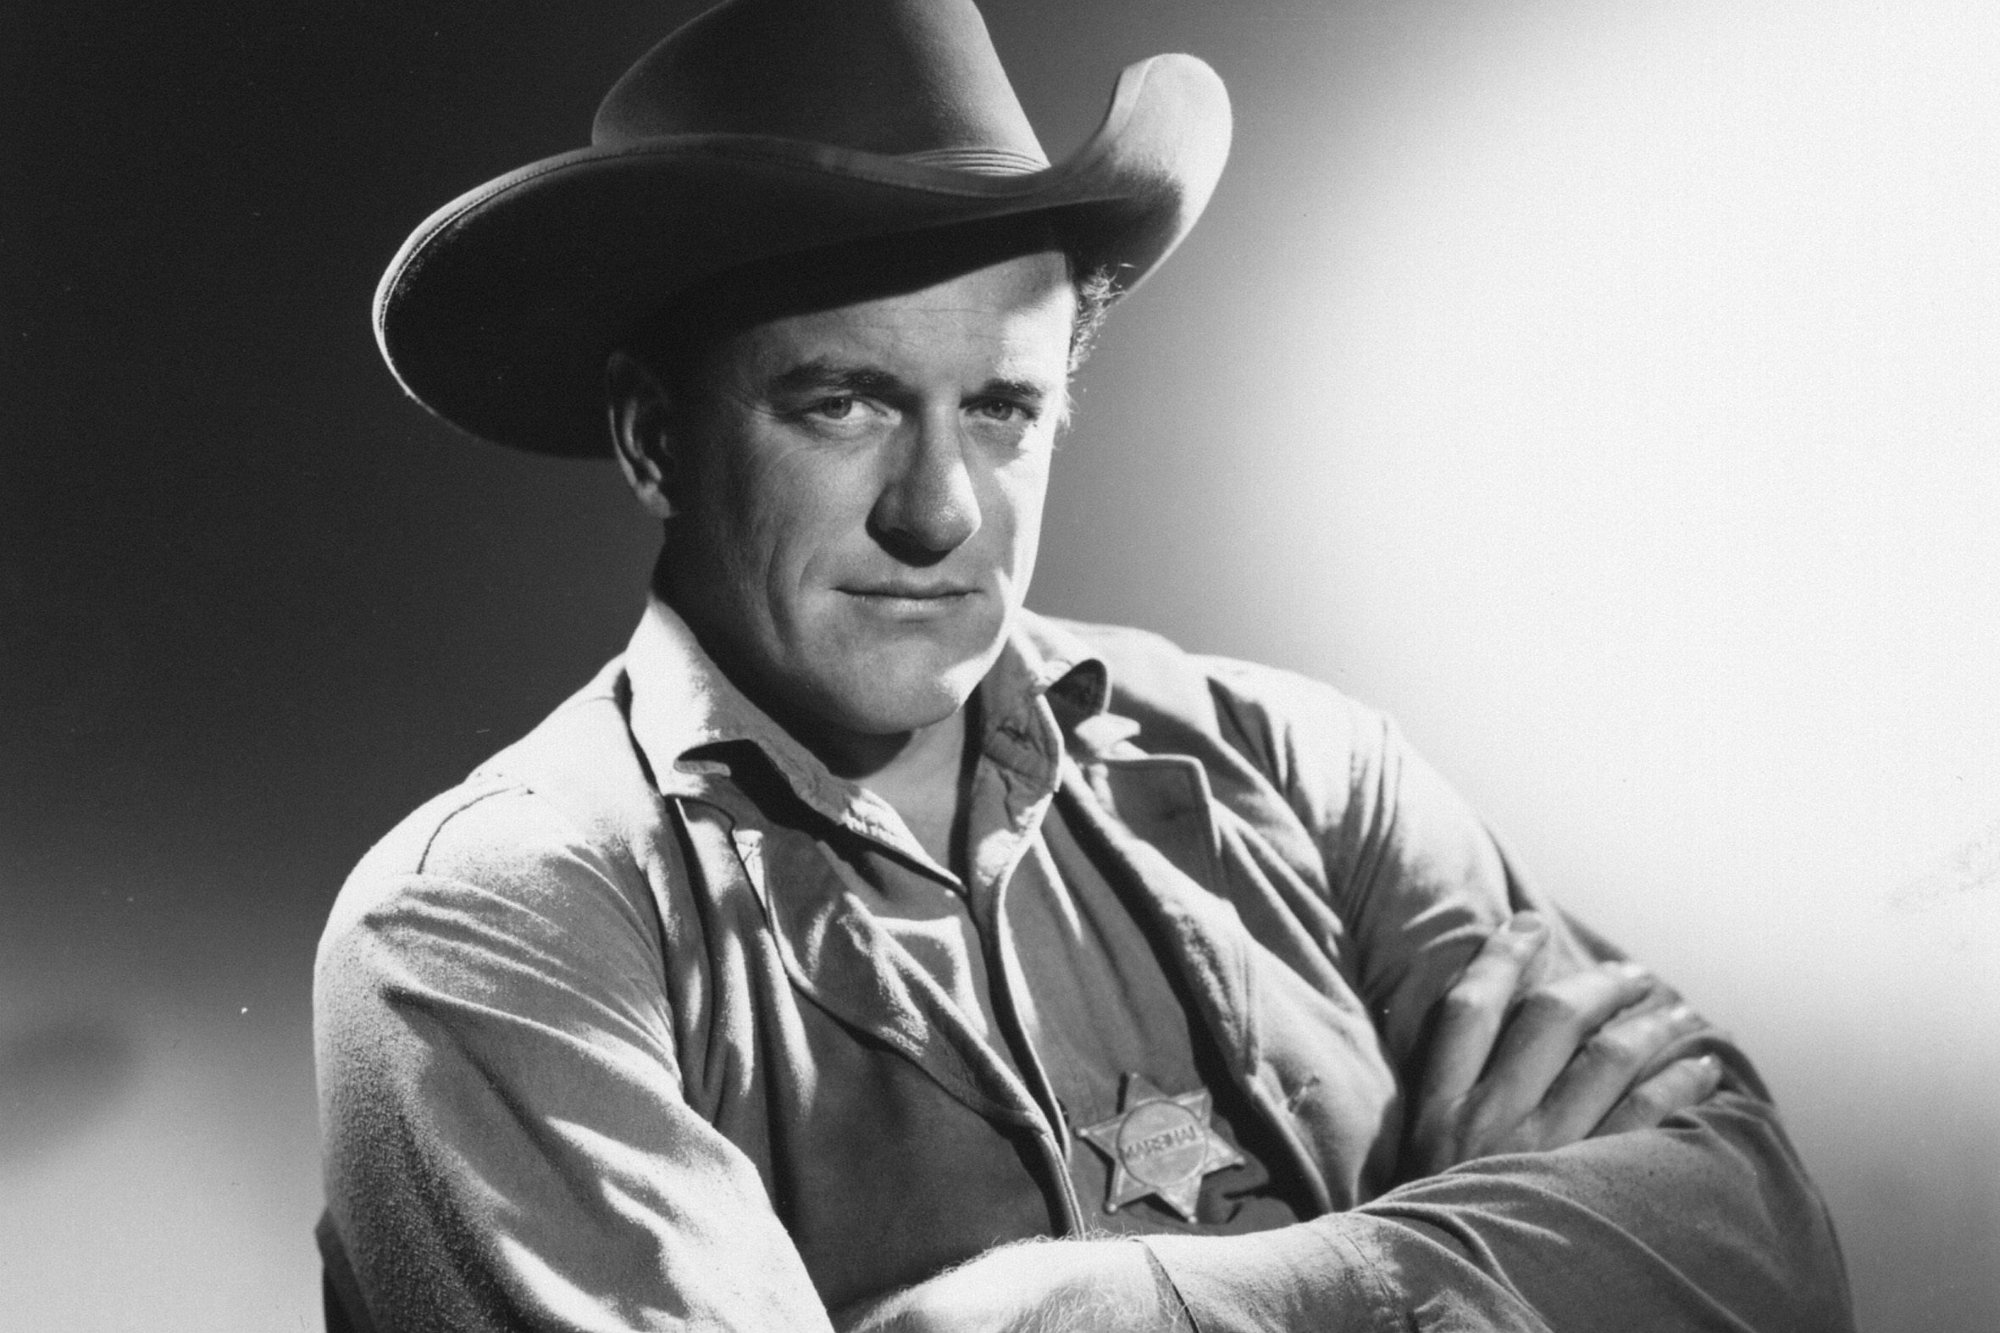 'Gunsmoke' actor James Arness as U.S. Marshal Matt Dillon with his arms crossed in a black-and-white picture. He has his marshal badge on his vest and is wearing a Western hat.